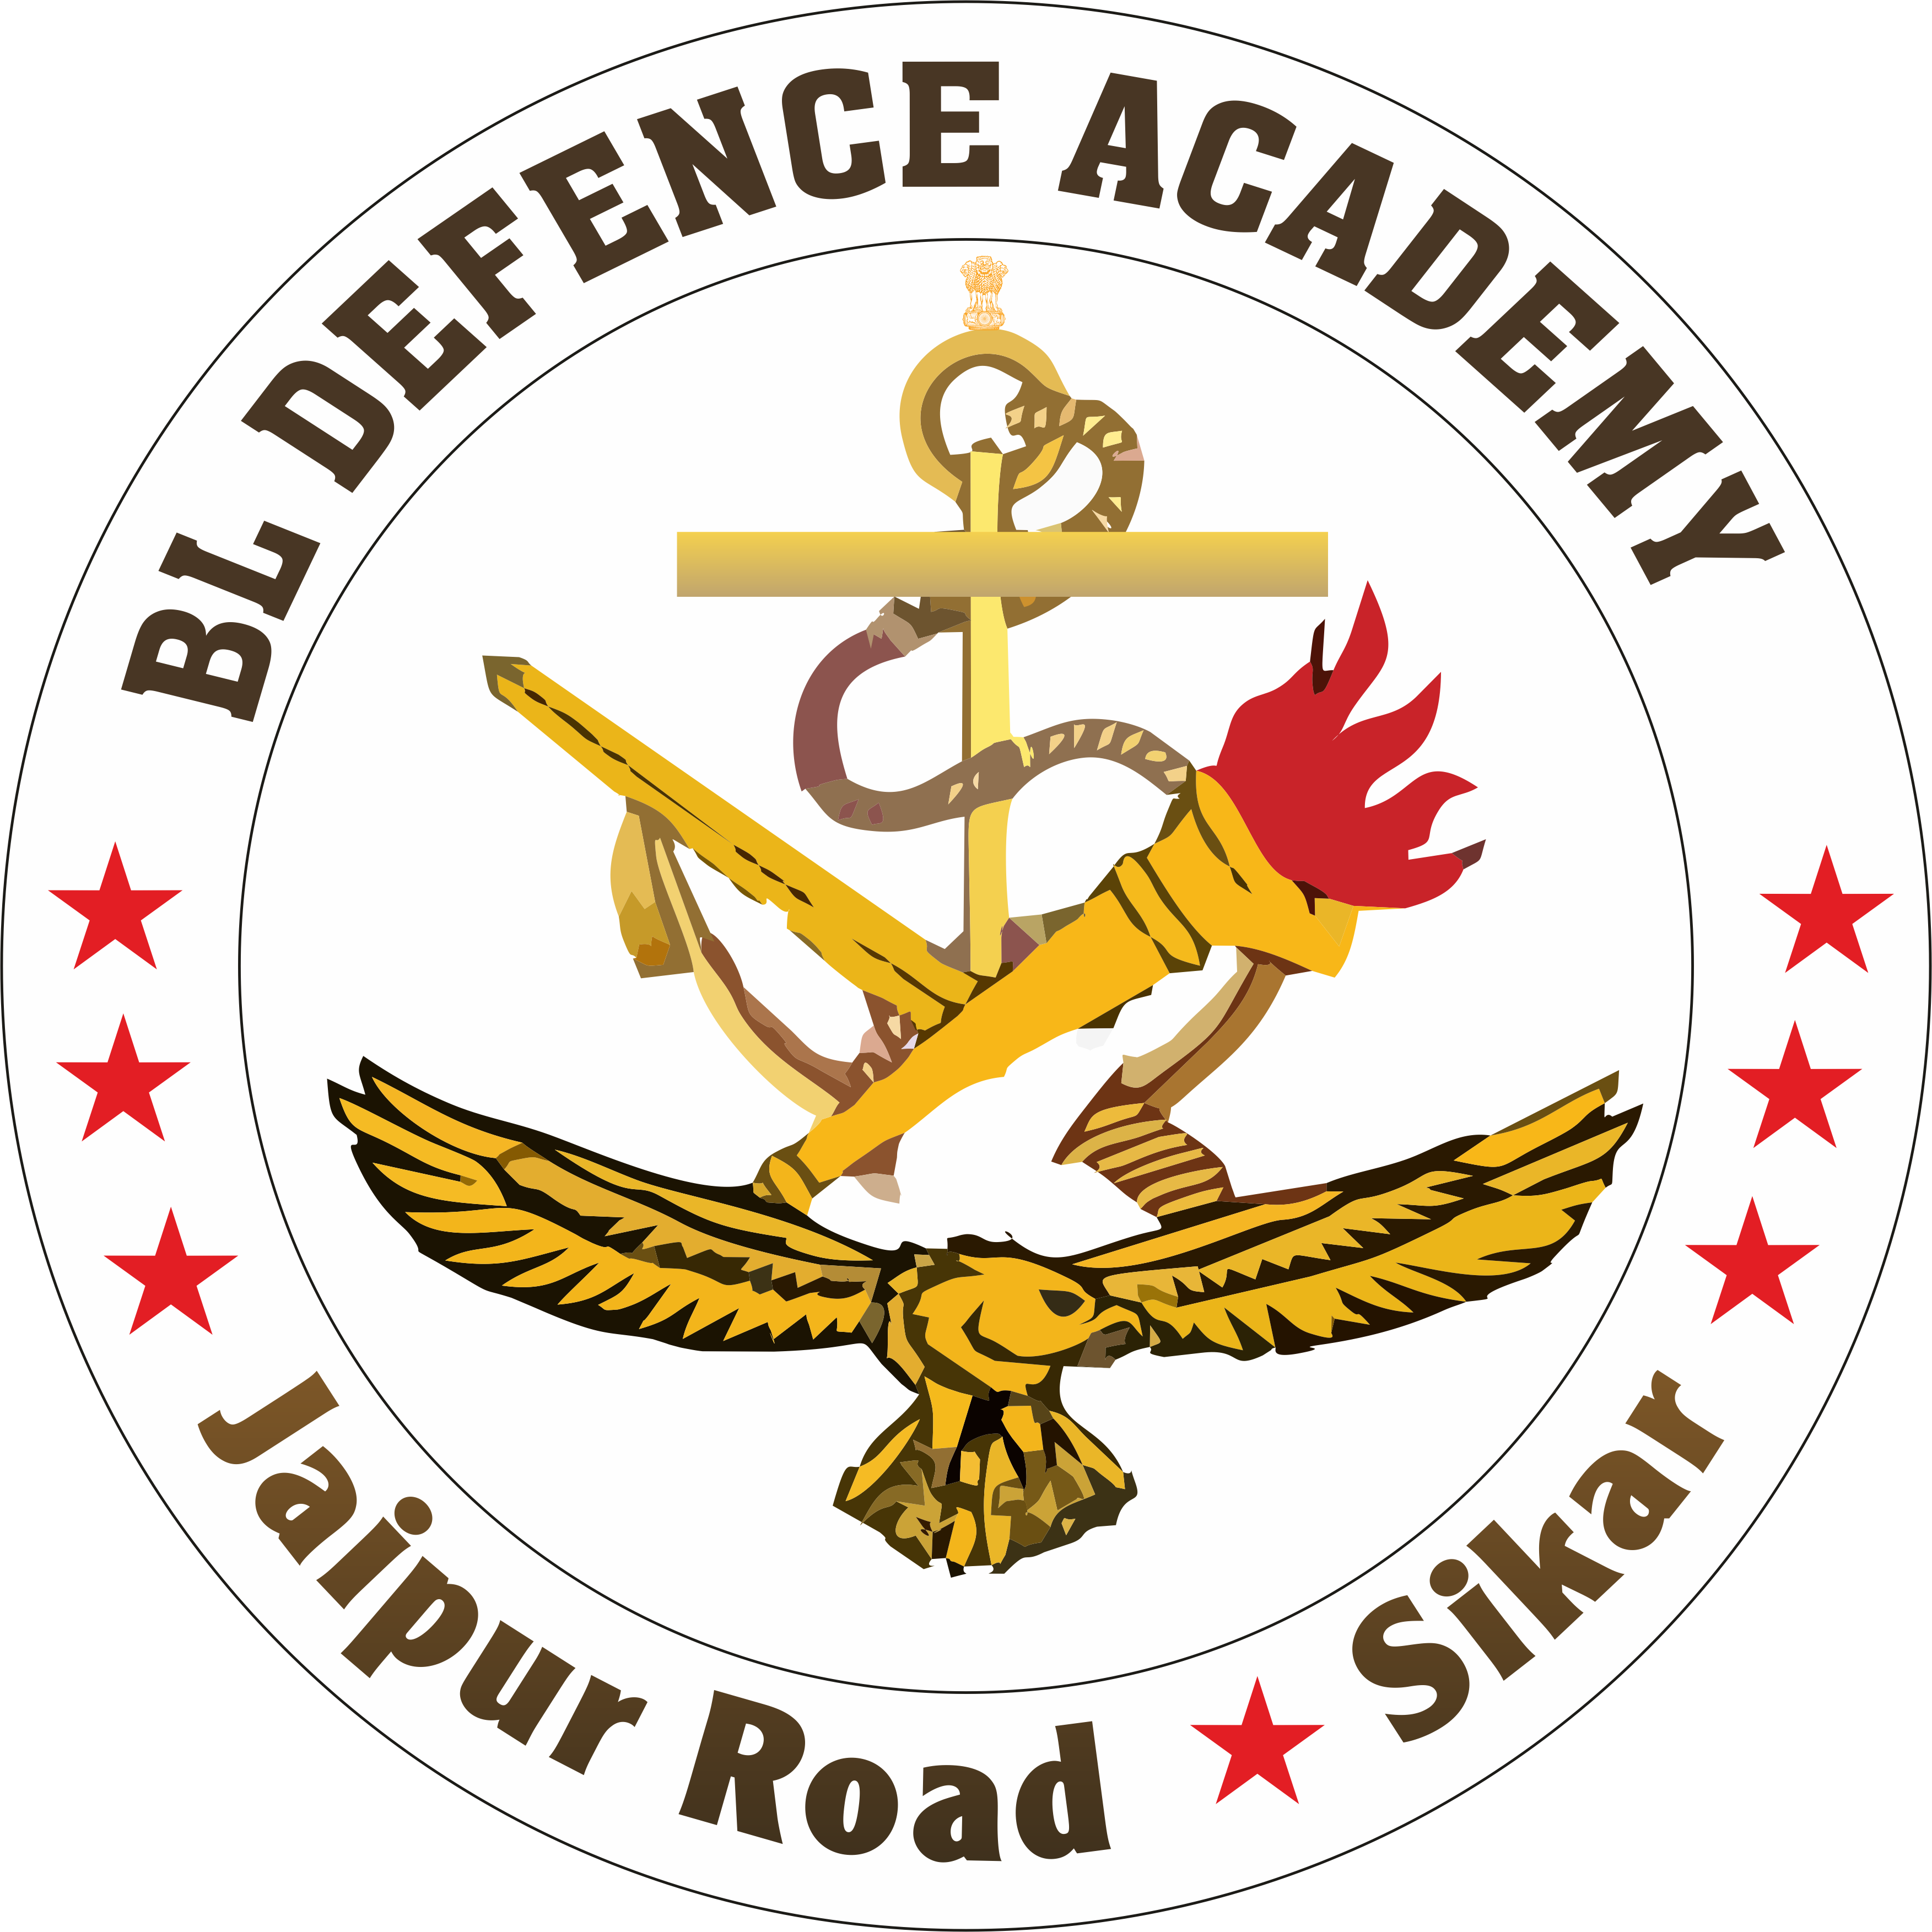 BL DEFENCE ACADEMY